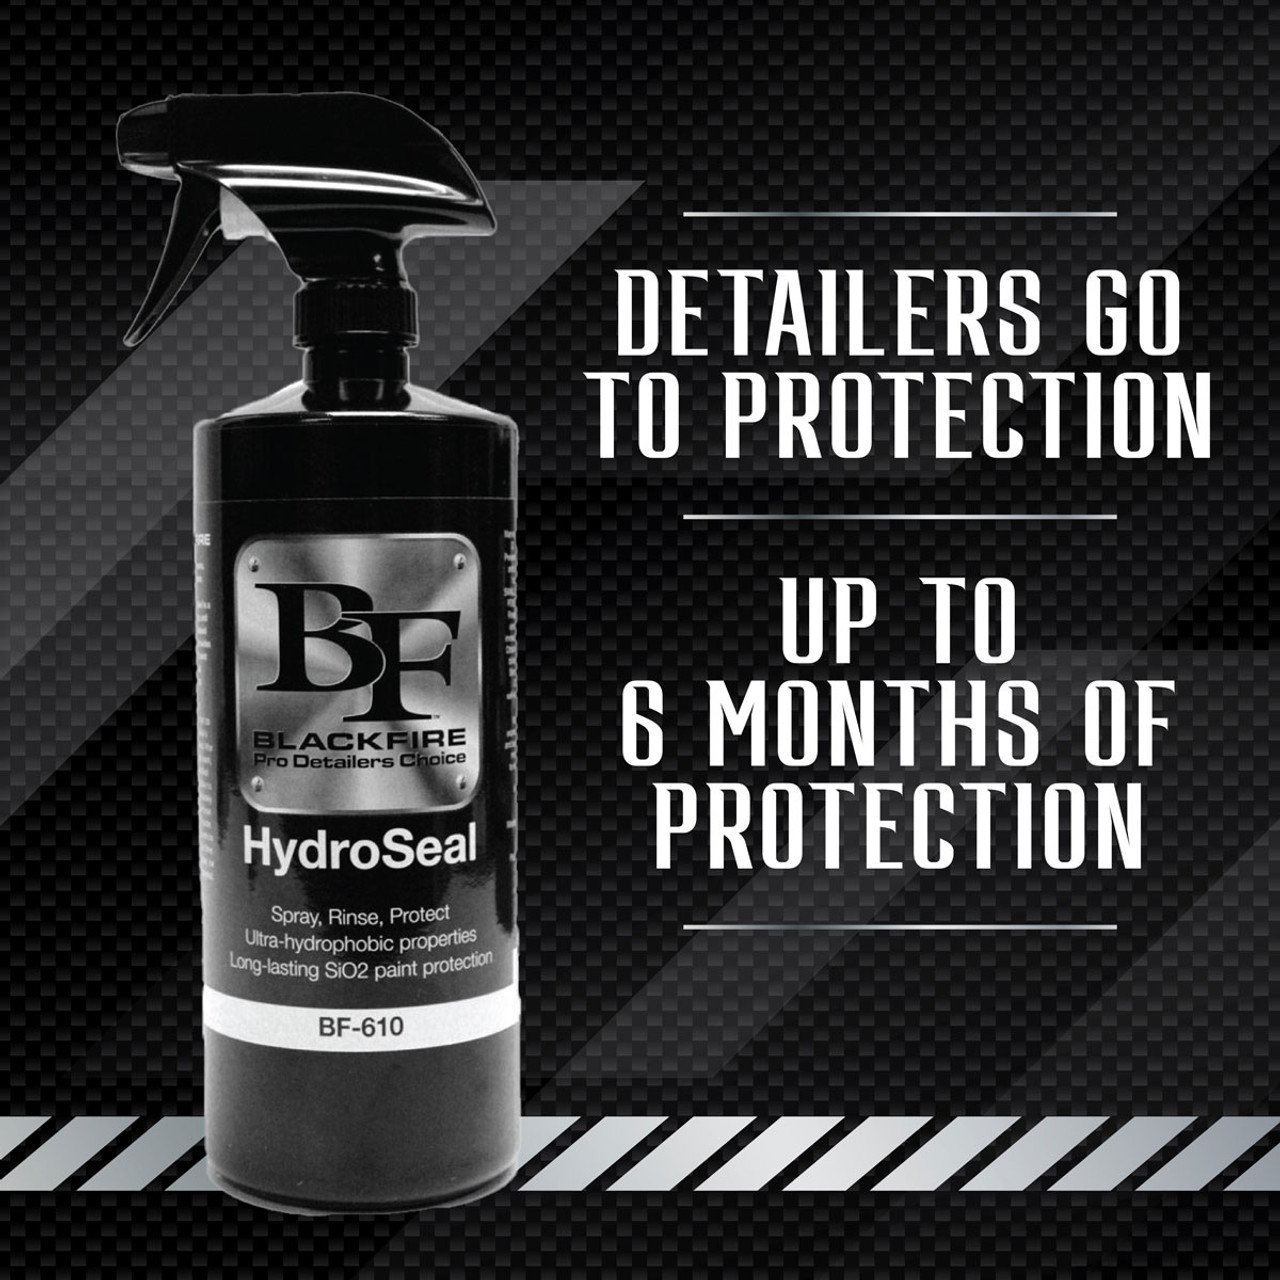 Blackfire Pro Detailers Choice Bug Remover, 32 oz. Spray Bottle,  Specialized Automotive Spray Cleaner & Spot Treatment, Will Not Damage  Vehicle's